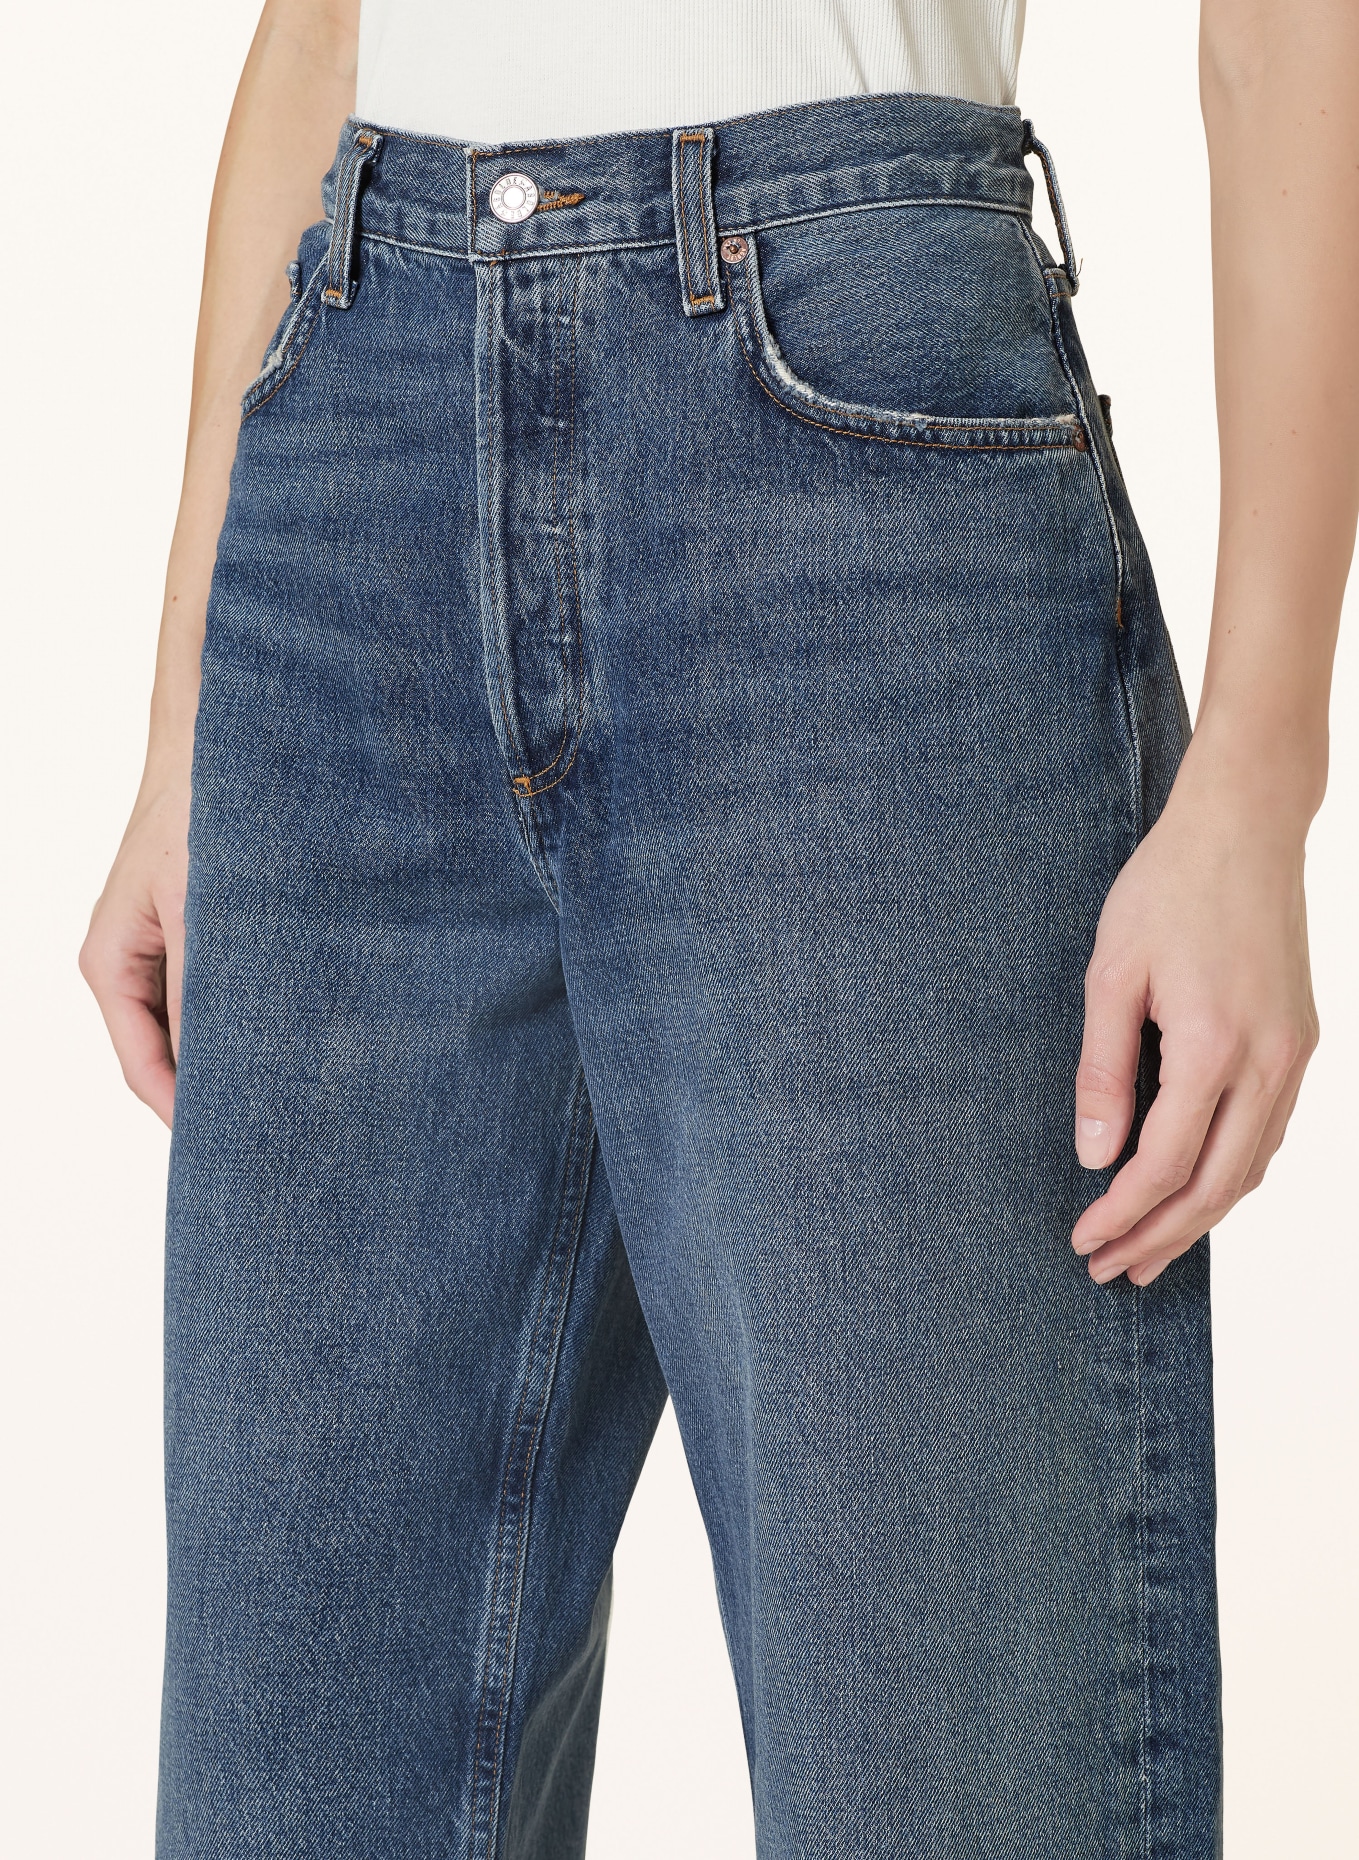 AGOLDE Straight jeans, Color: image image (Image 5)